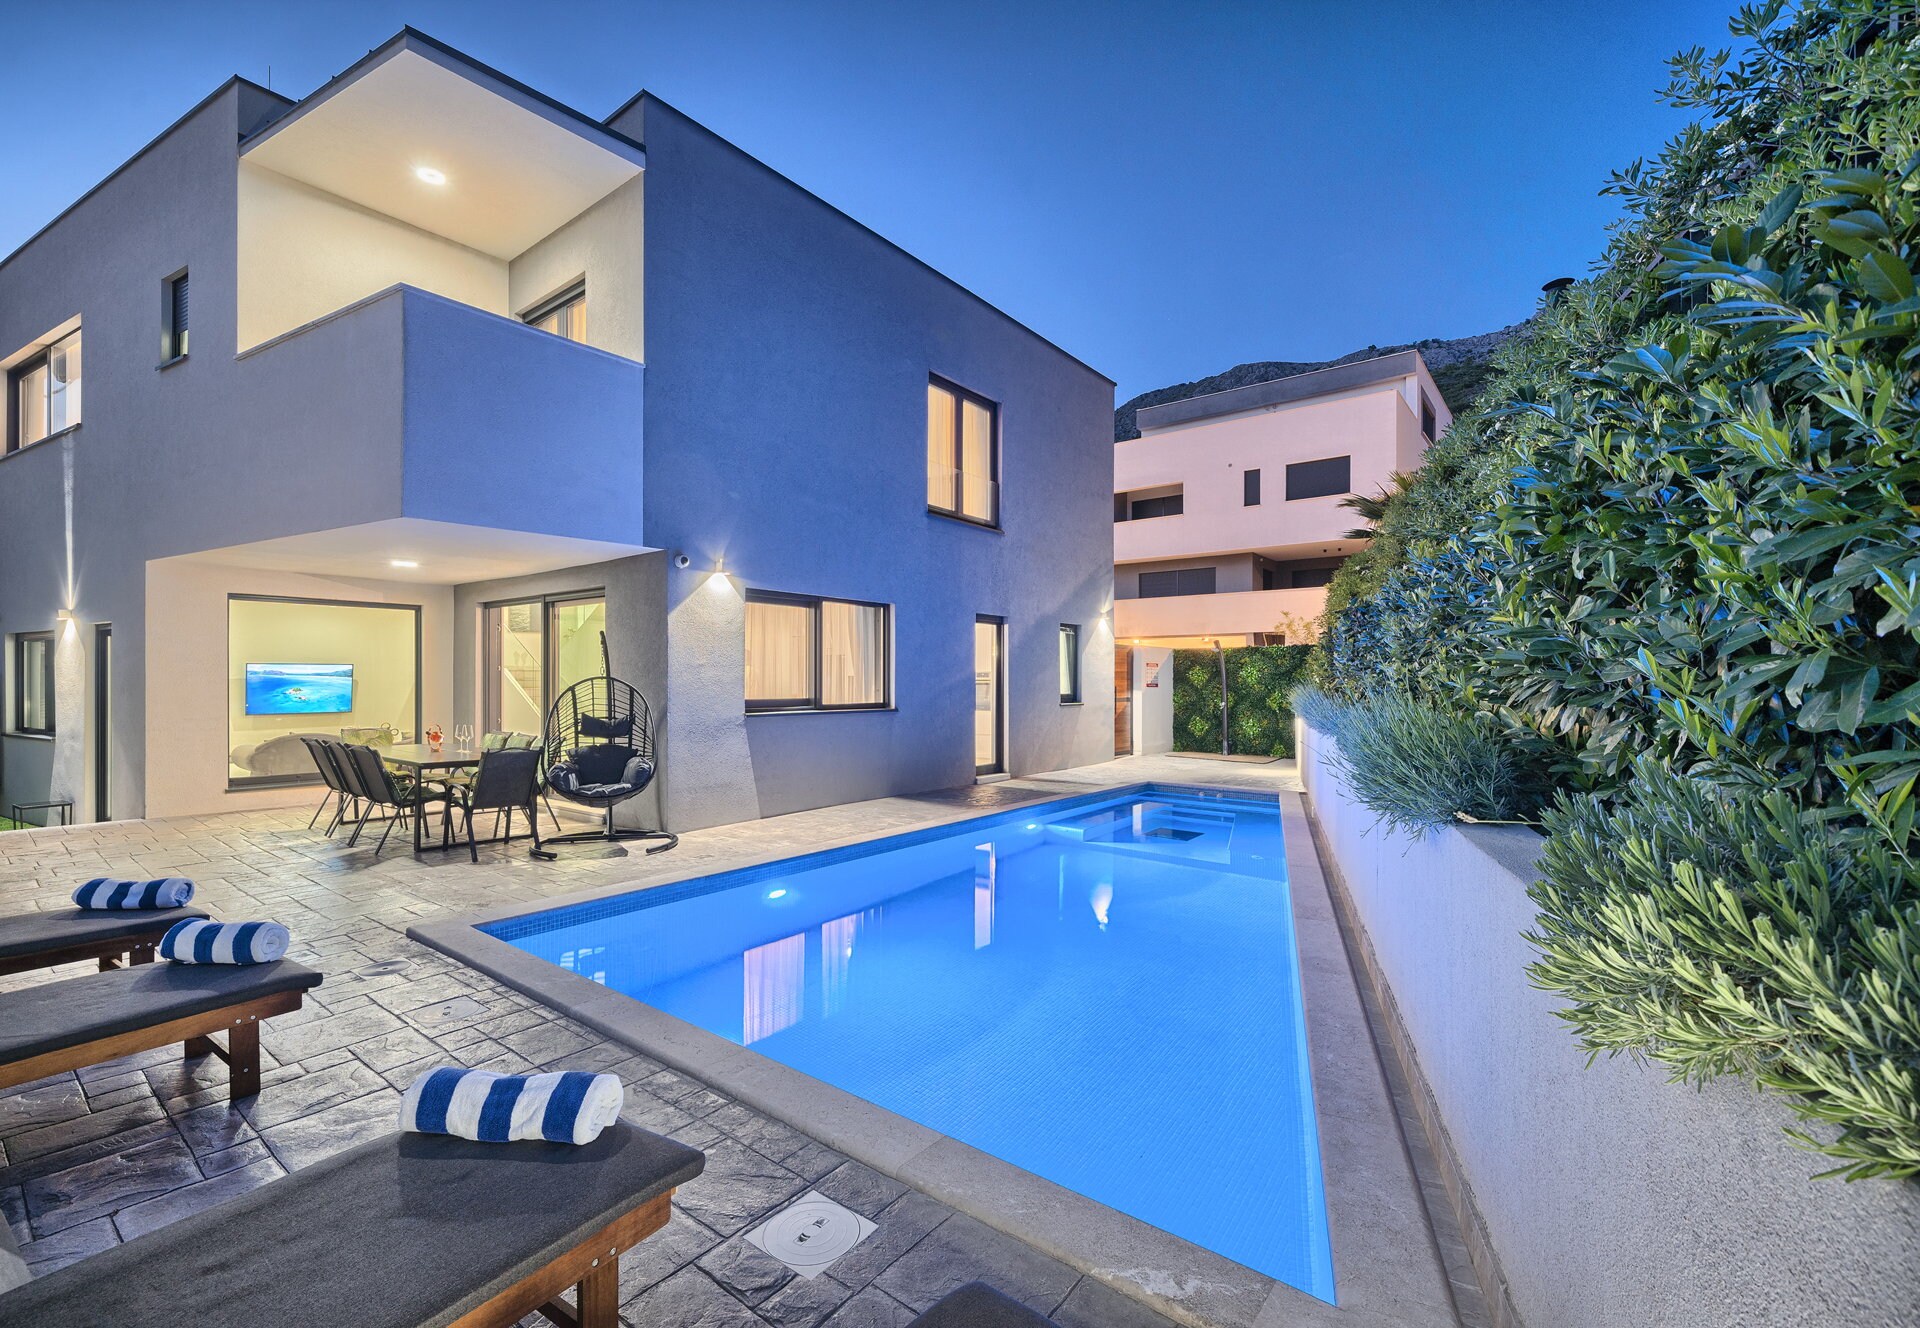 Property Image 1 - Gorgeous Holiday Villa with Pool and Private Garage